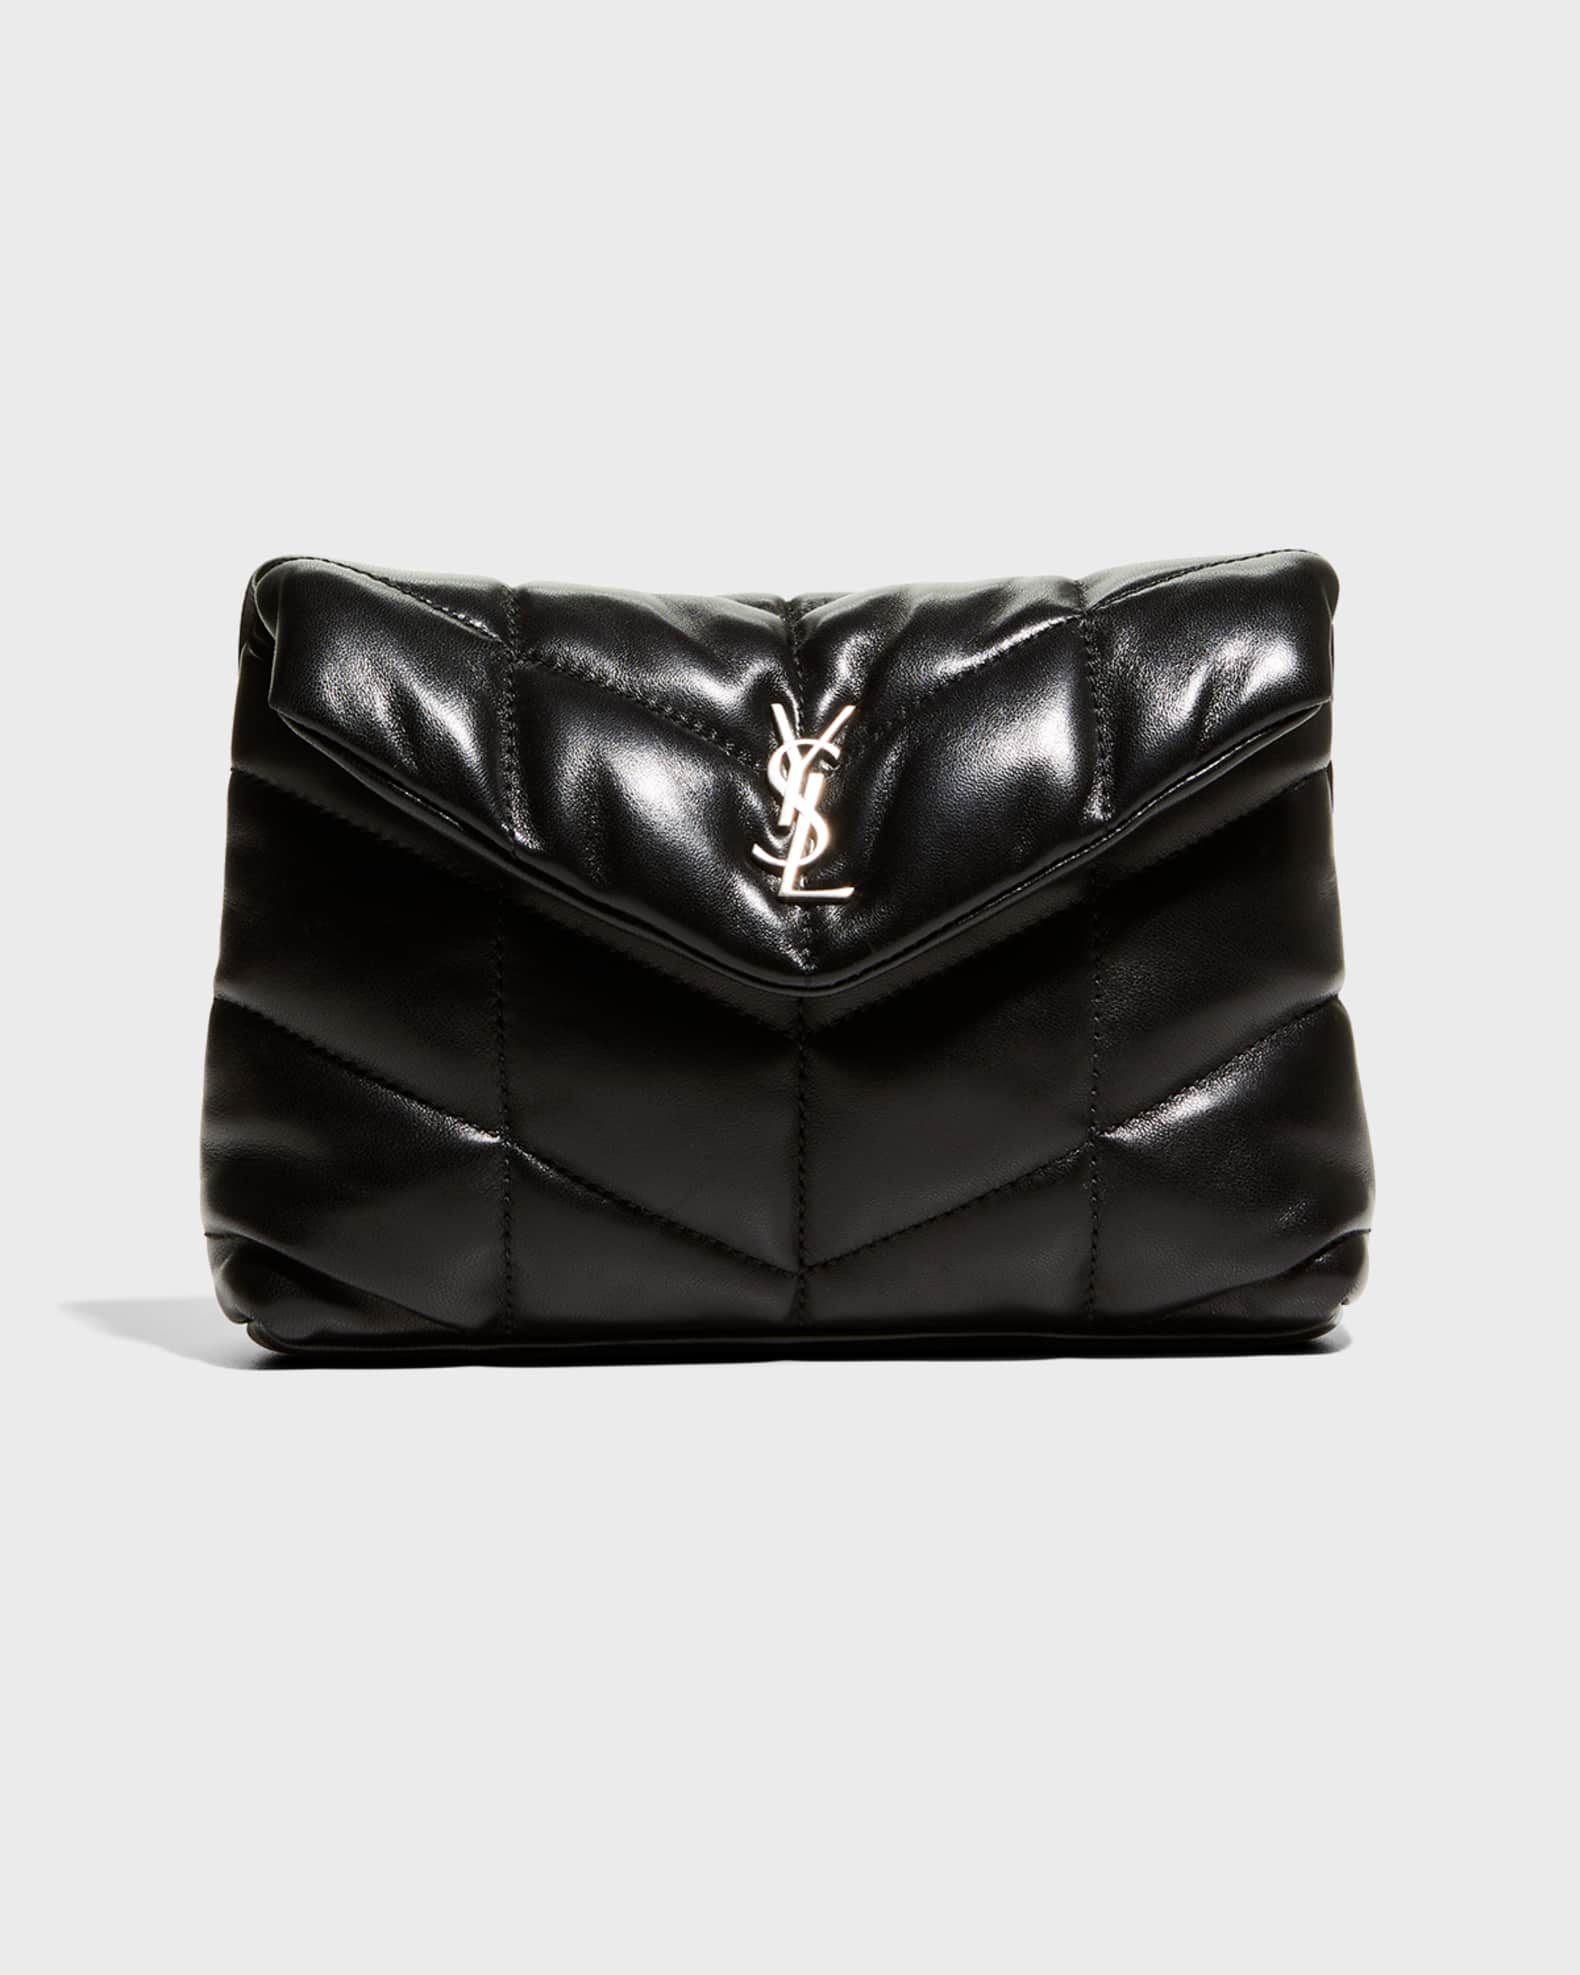 Saint Laurent Puffer Small Pouch in Quilted Lambskin - Black